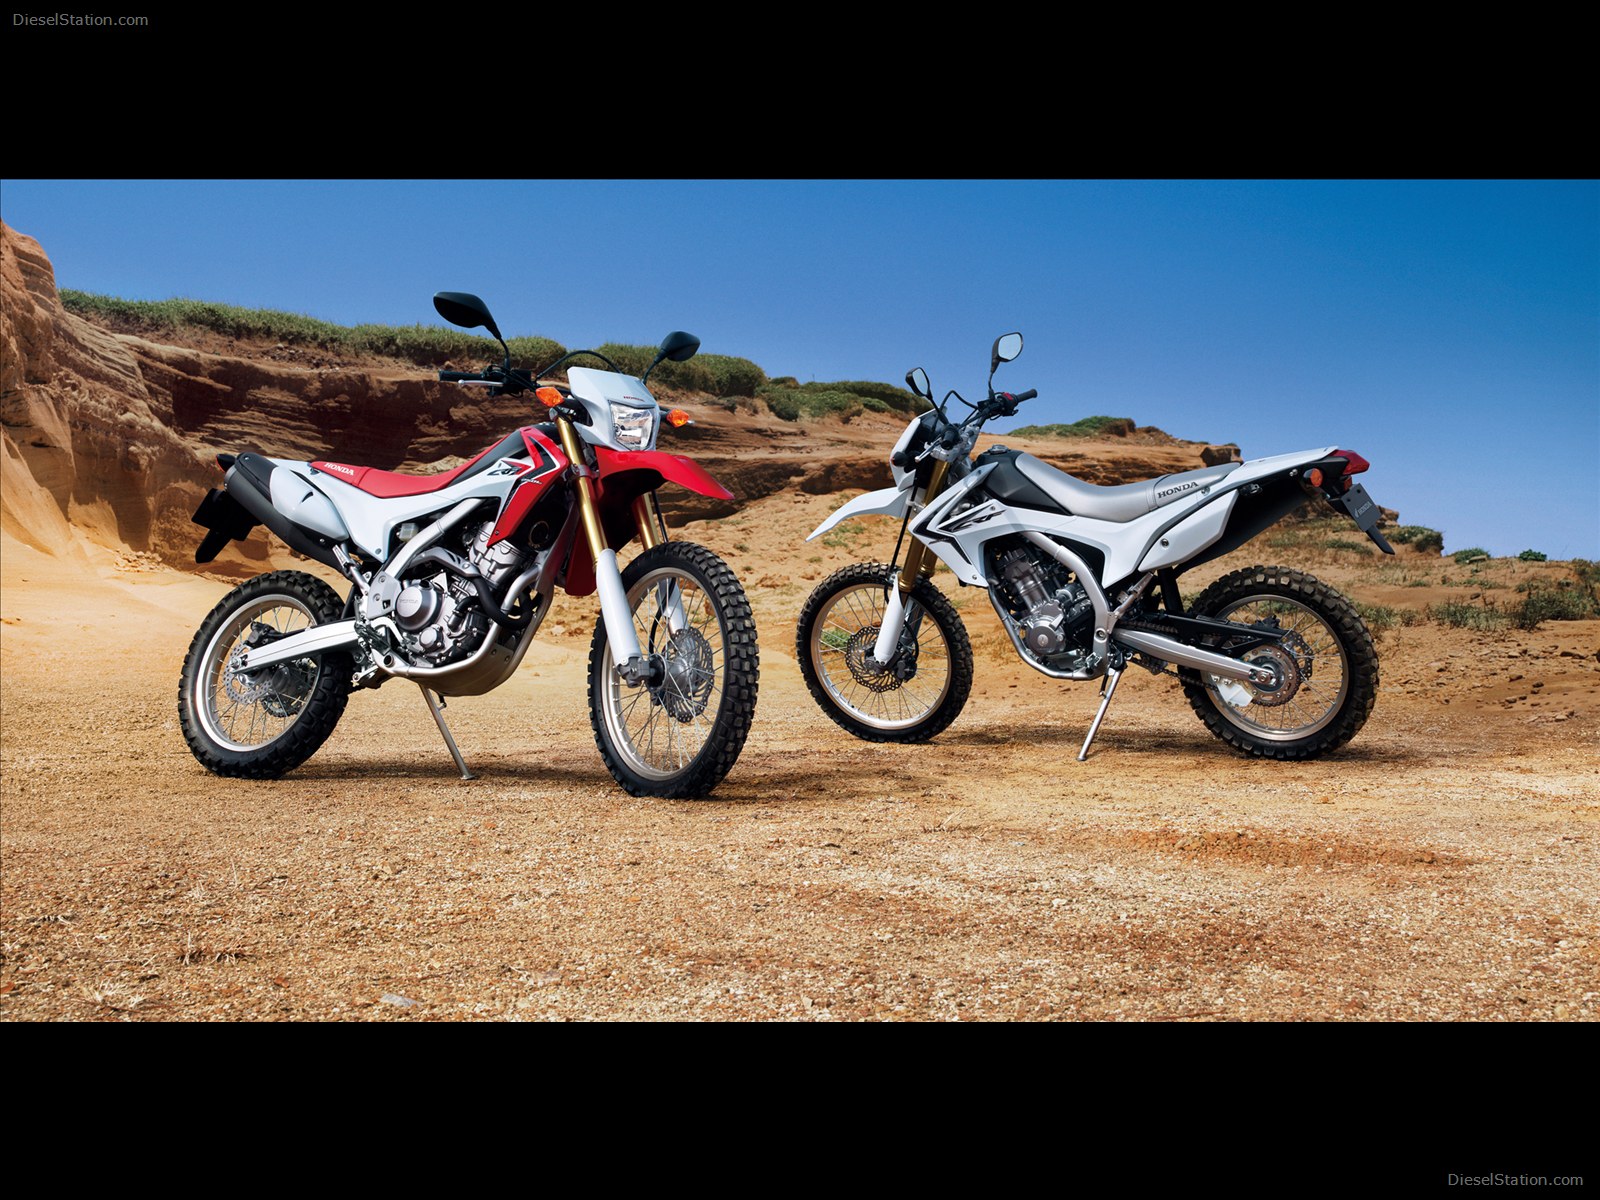 Honda CRF250L 2012 Exotic Car Pictures 06 of 36 Diesel Station